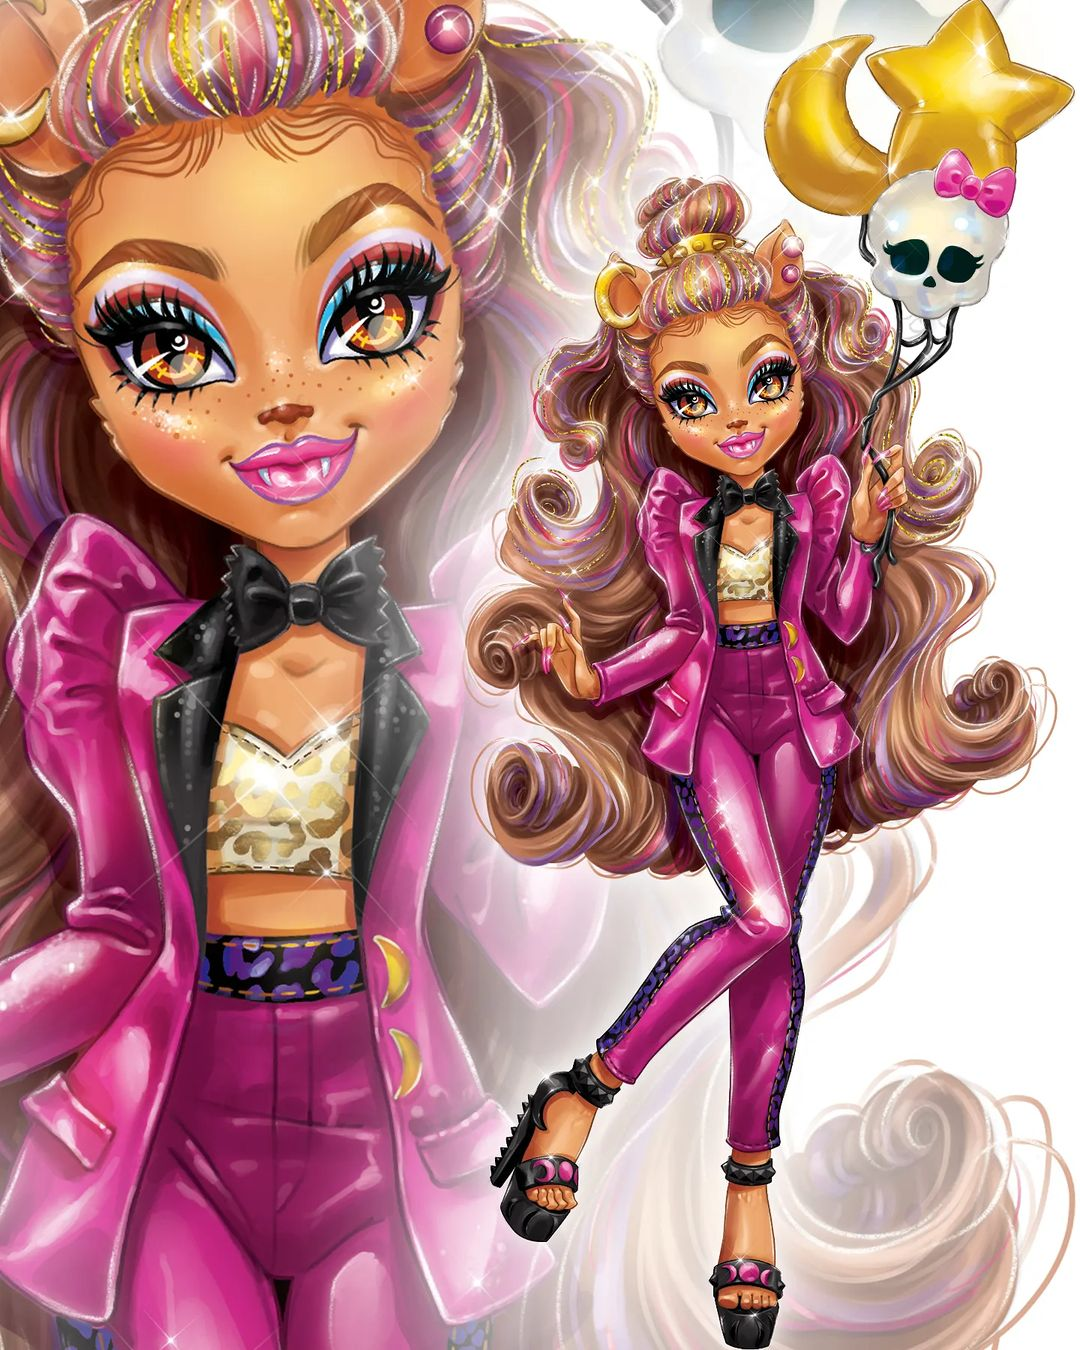 Monster High Clawdeen Wolf Fashion Doll In Monster Ball Party